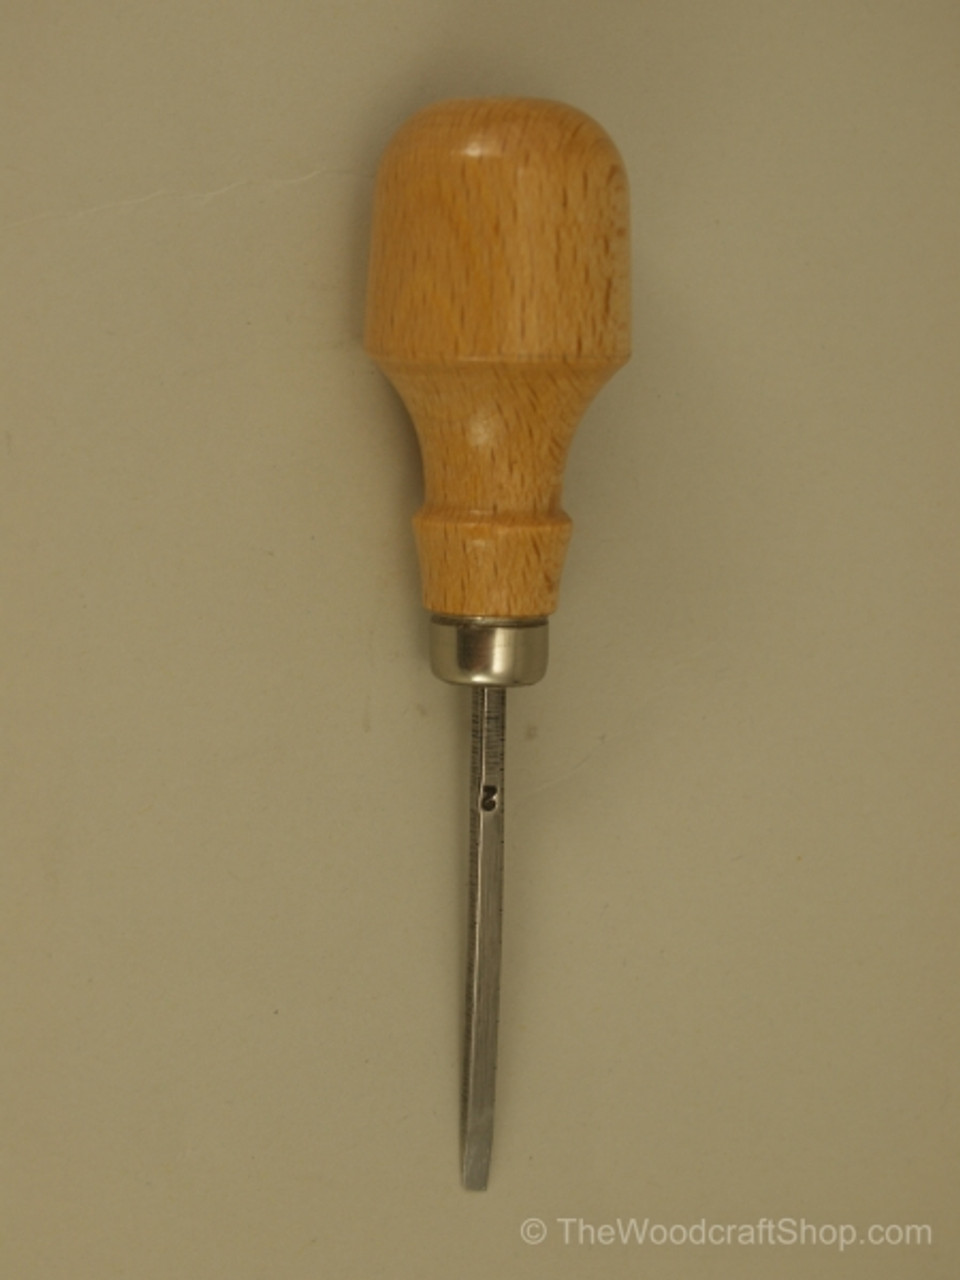 The photo is revealing the blade and handle of the Stubai Palm #2 x 3mm Skew Chisel.